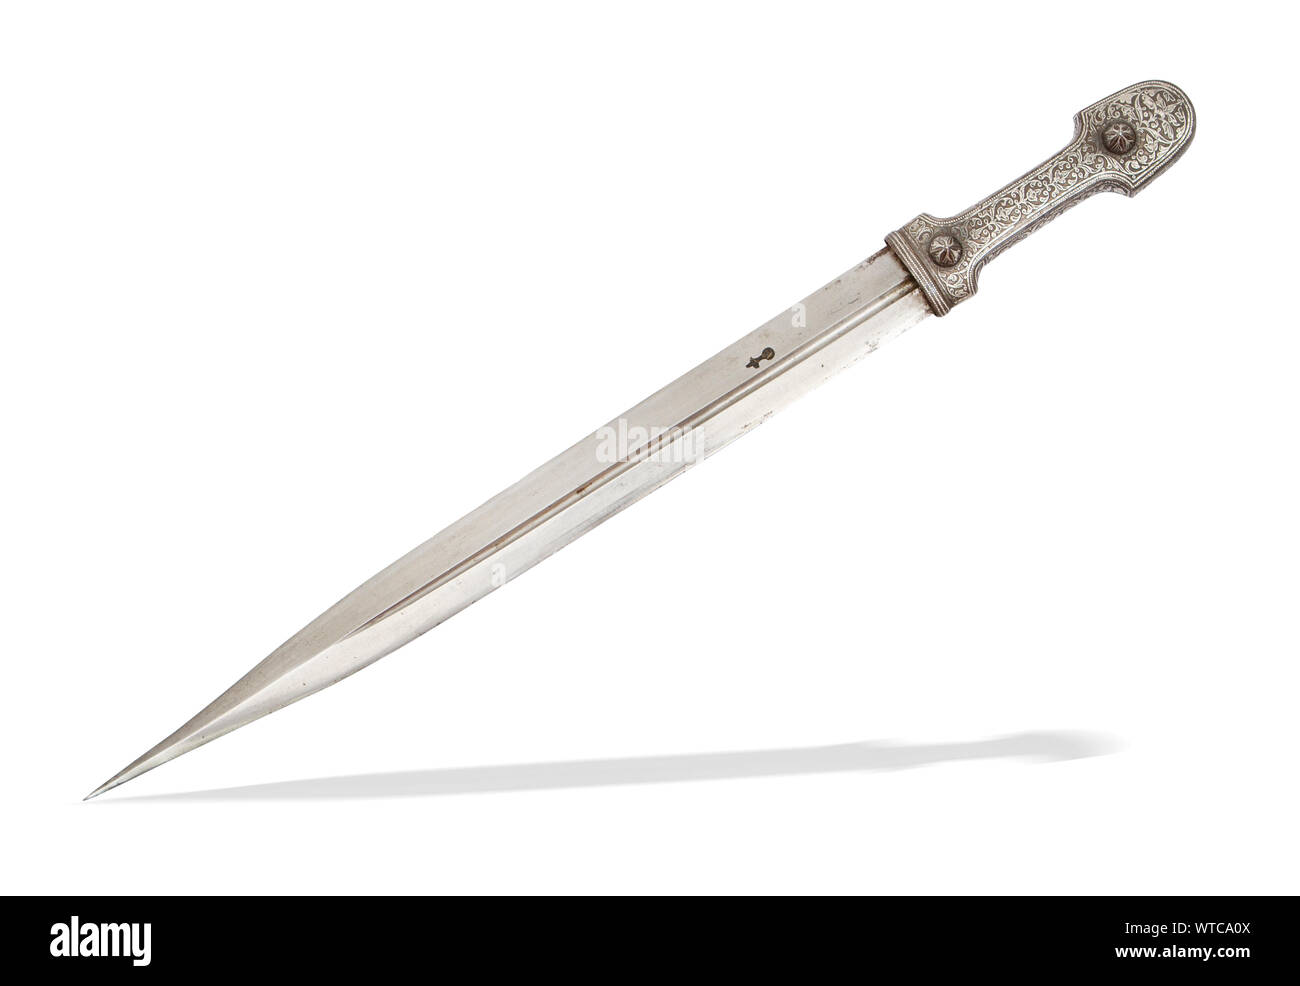 Caucasian dagger with blade decorated with etching. Thick silver mounts with engraving finished with niello. Stock Photo